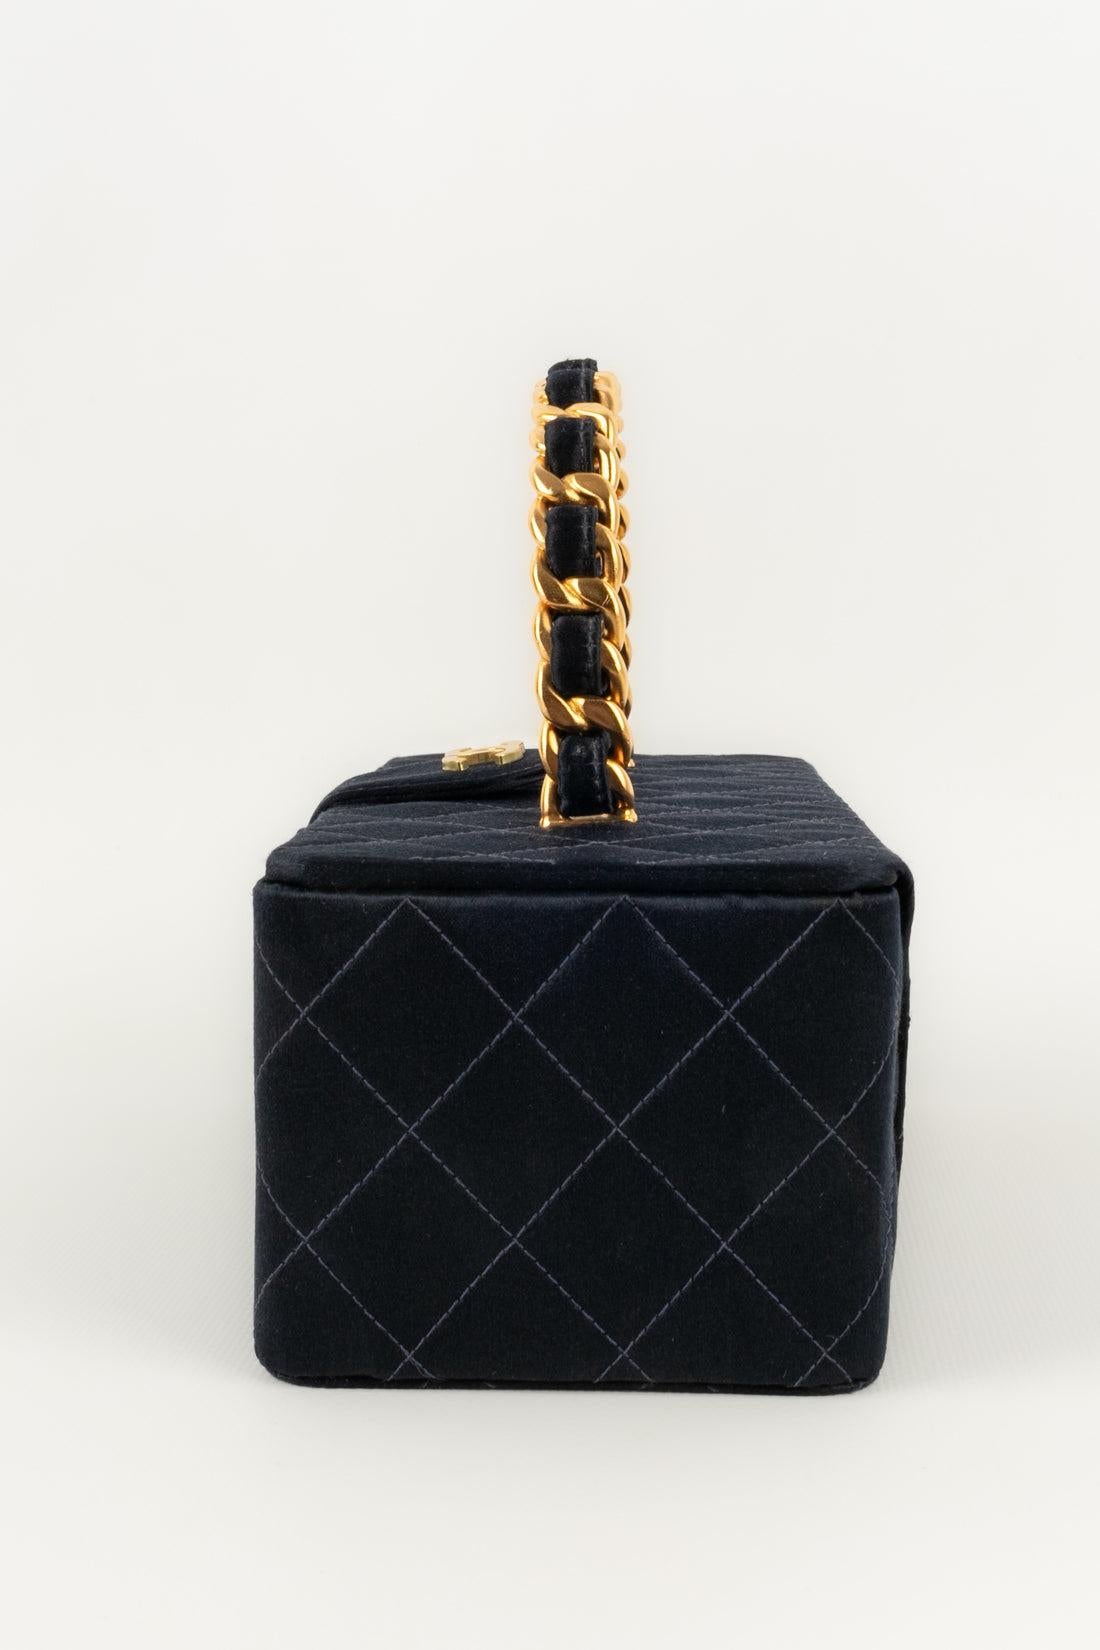 Women's Chanel Quilted Silk Satin Bag with Golden Metal Elements, 1994/1996